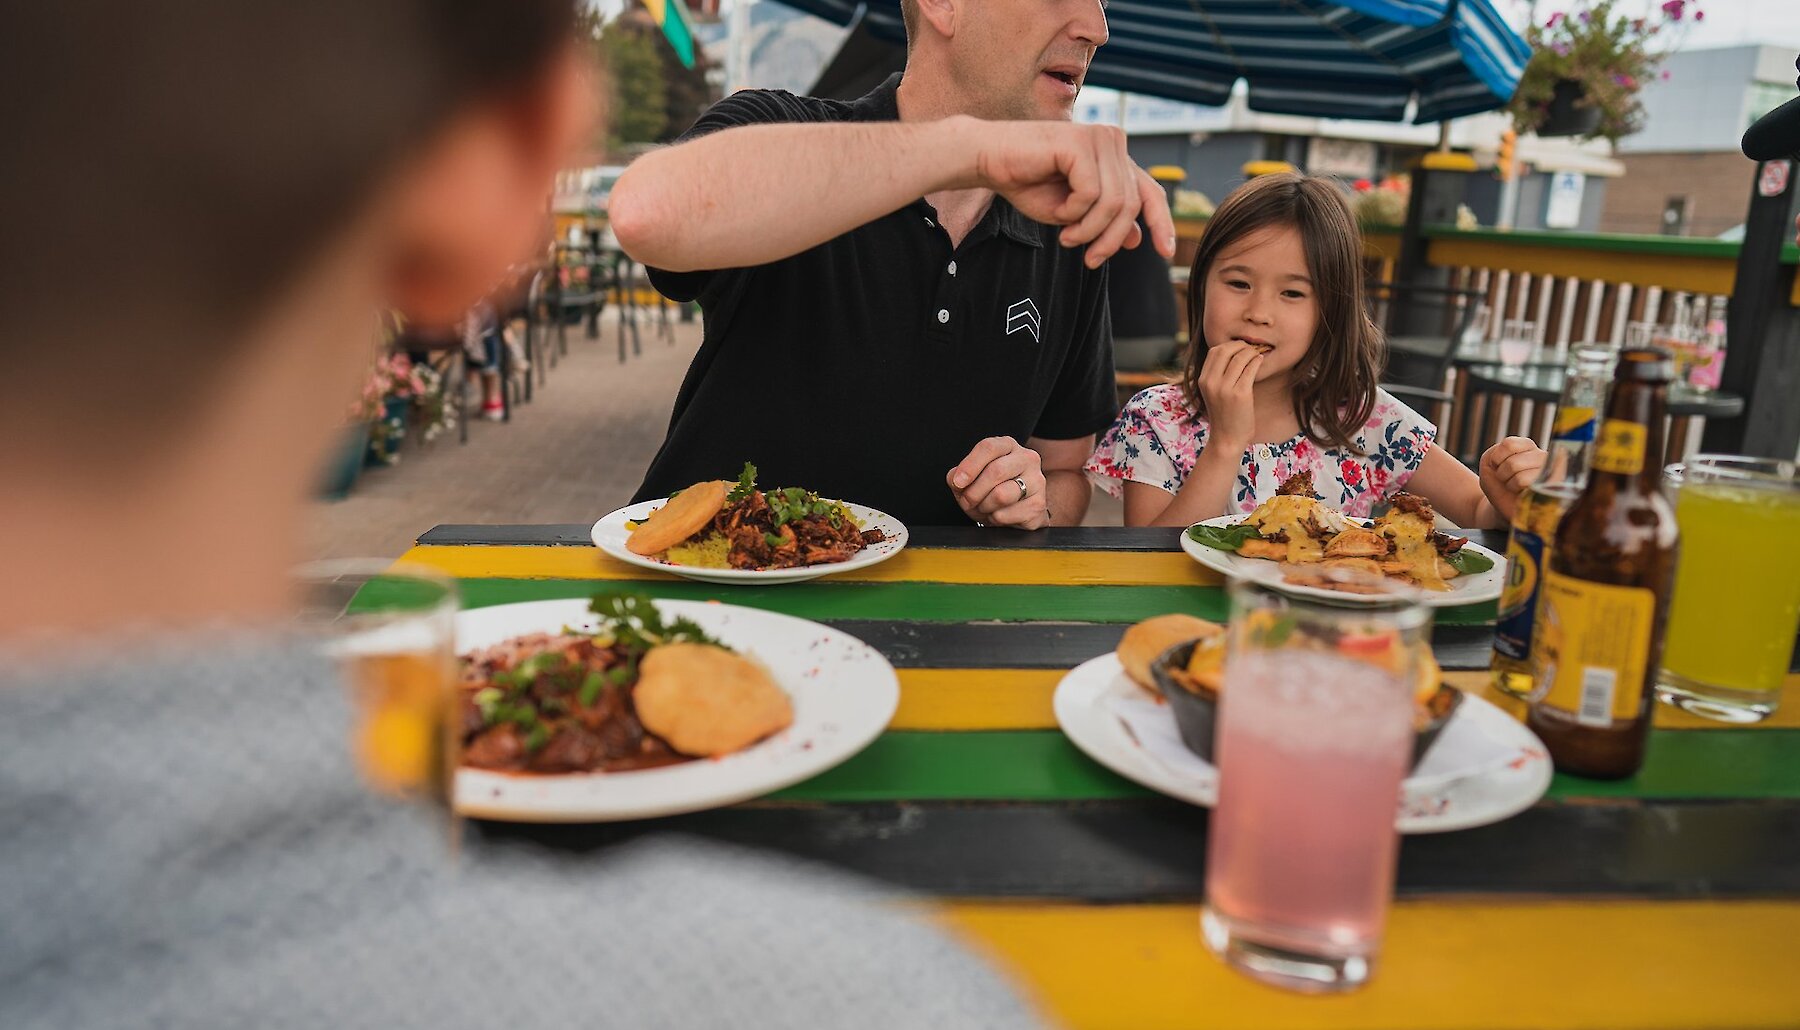 A Father and daughter enjoying the Jamaican Kitchen's family-friendly food located on the North Shore in Kamloops, British Columbia.